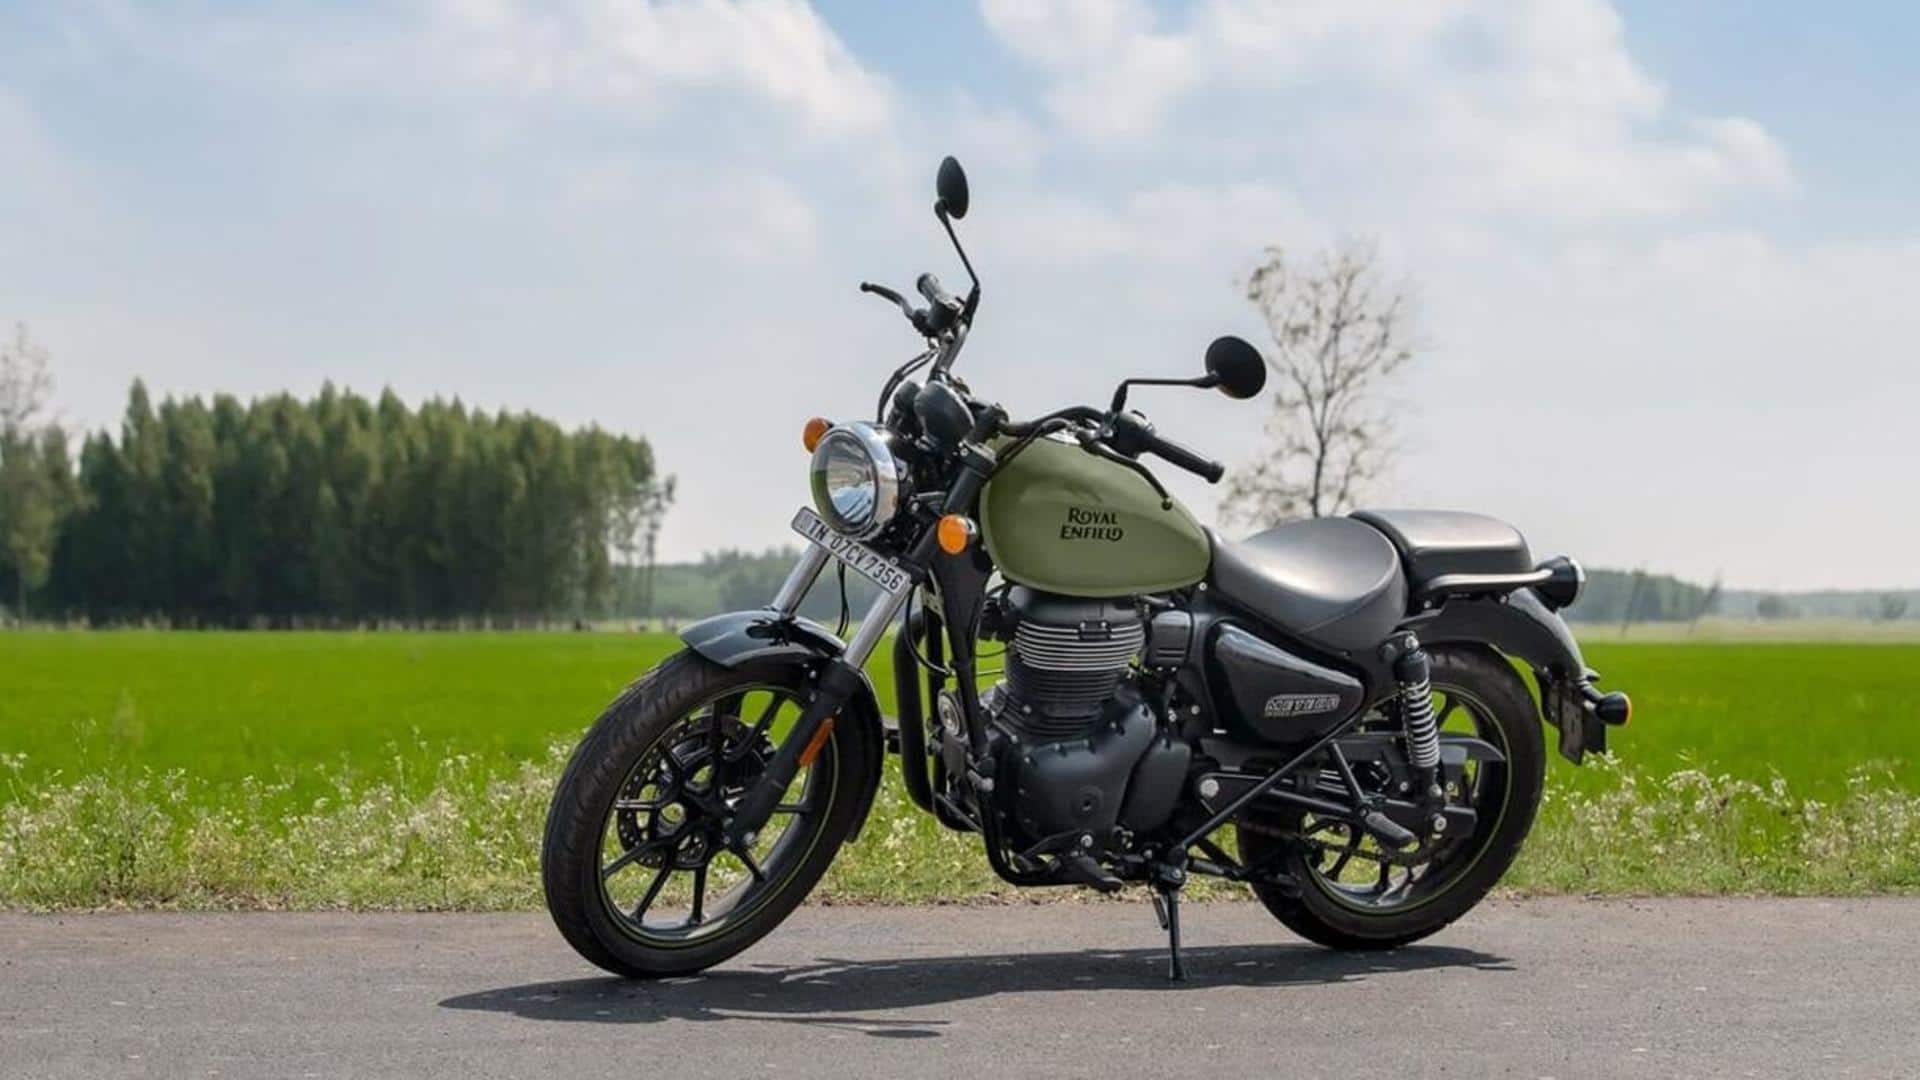 What to expect from 2023 Royal Enfield Meteor 350